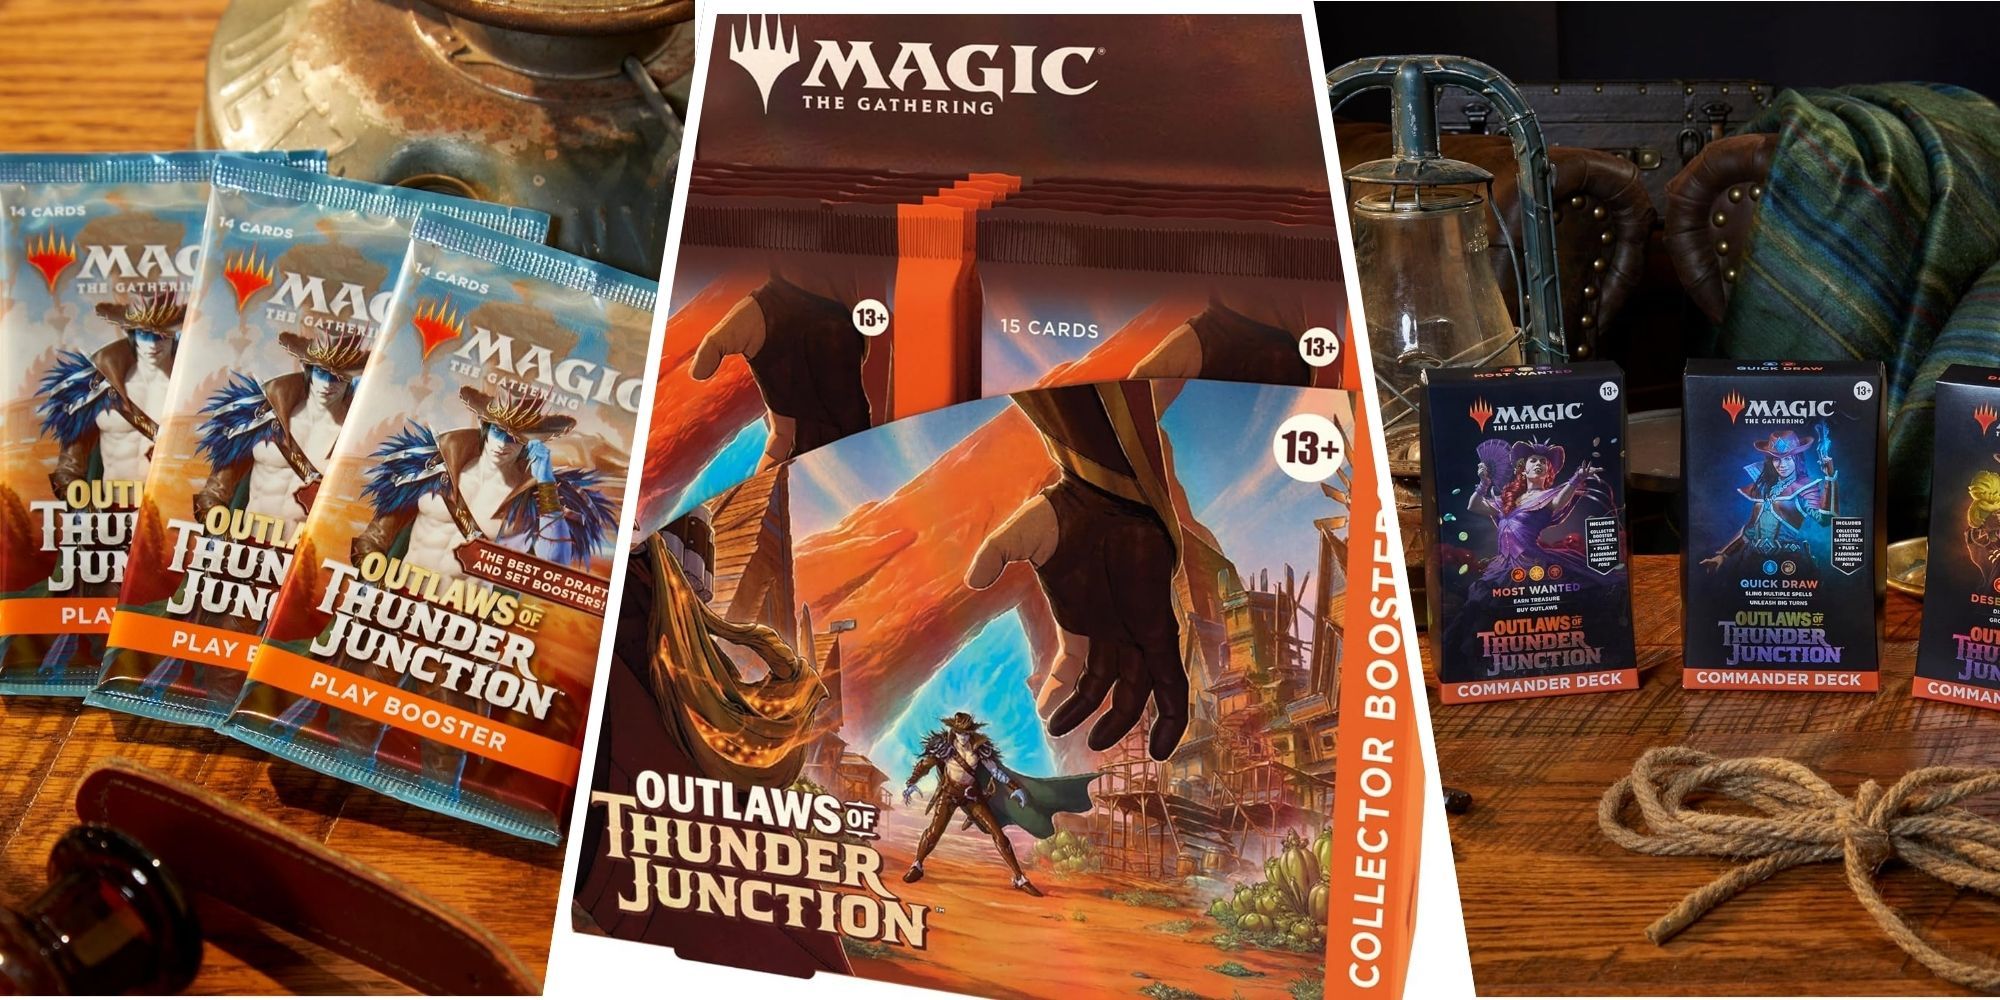 A tri-split image of Outlaws of Thunder Junction Play Boosters, a Collector Box, and Commander decks.